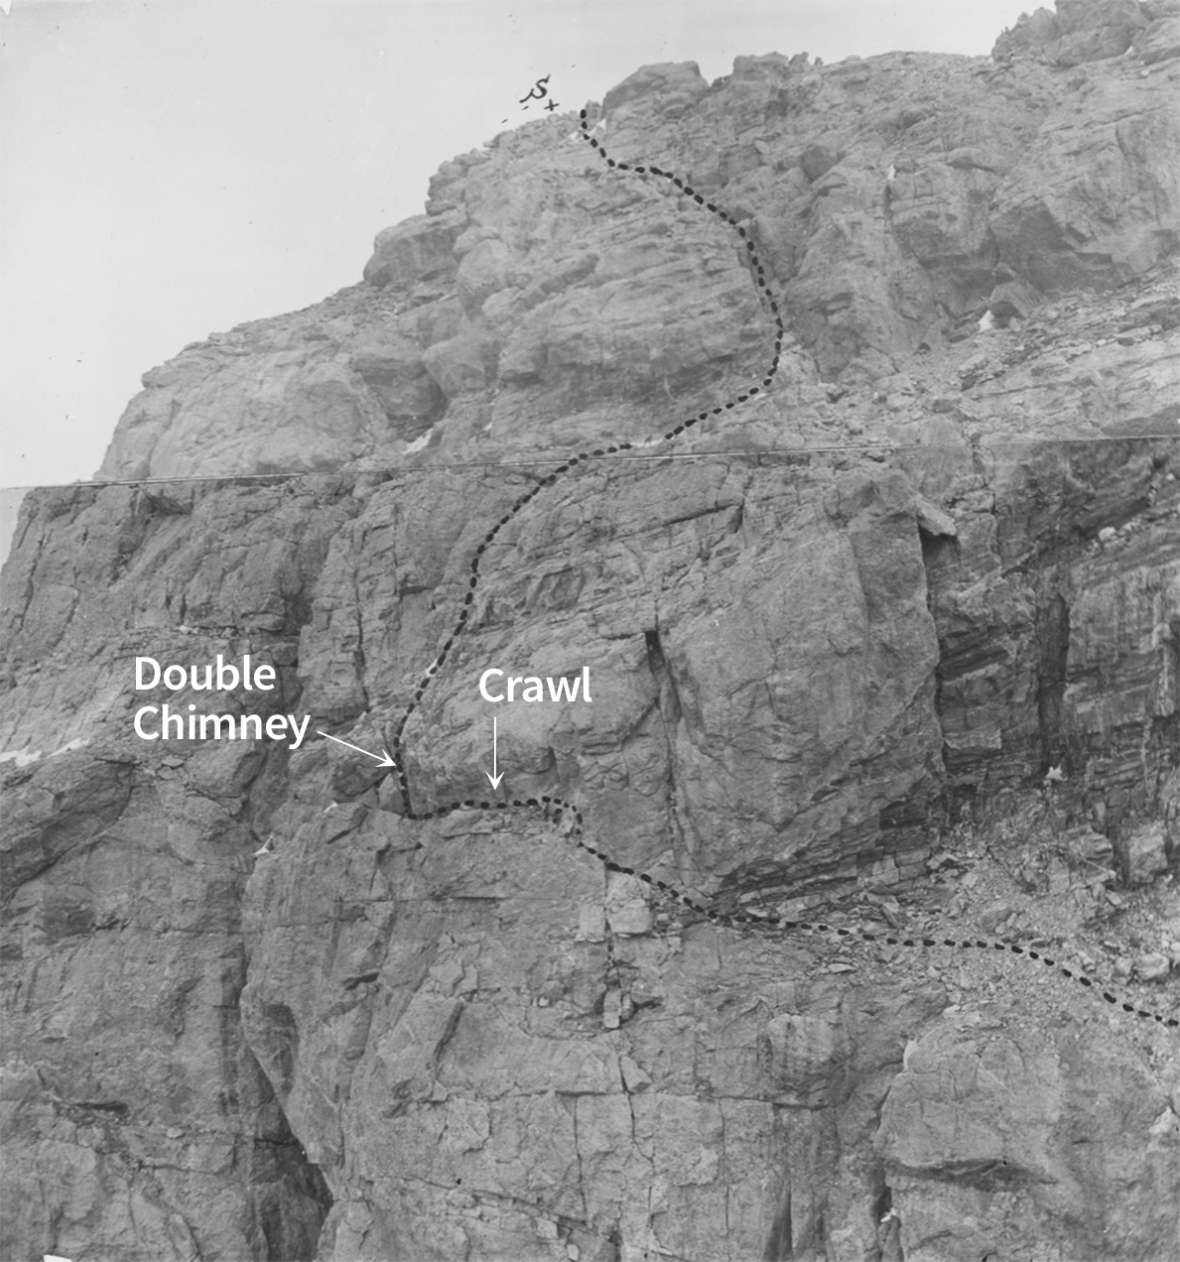 William O. Owen marked this composite photograph showing his party's path of ascent in 1898 with an 'S' to show the summit. Two of the more difficult stretches have been labeled with Owen’s terms by the author. American Heritage Center.